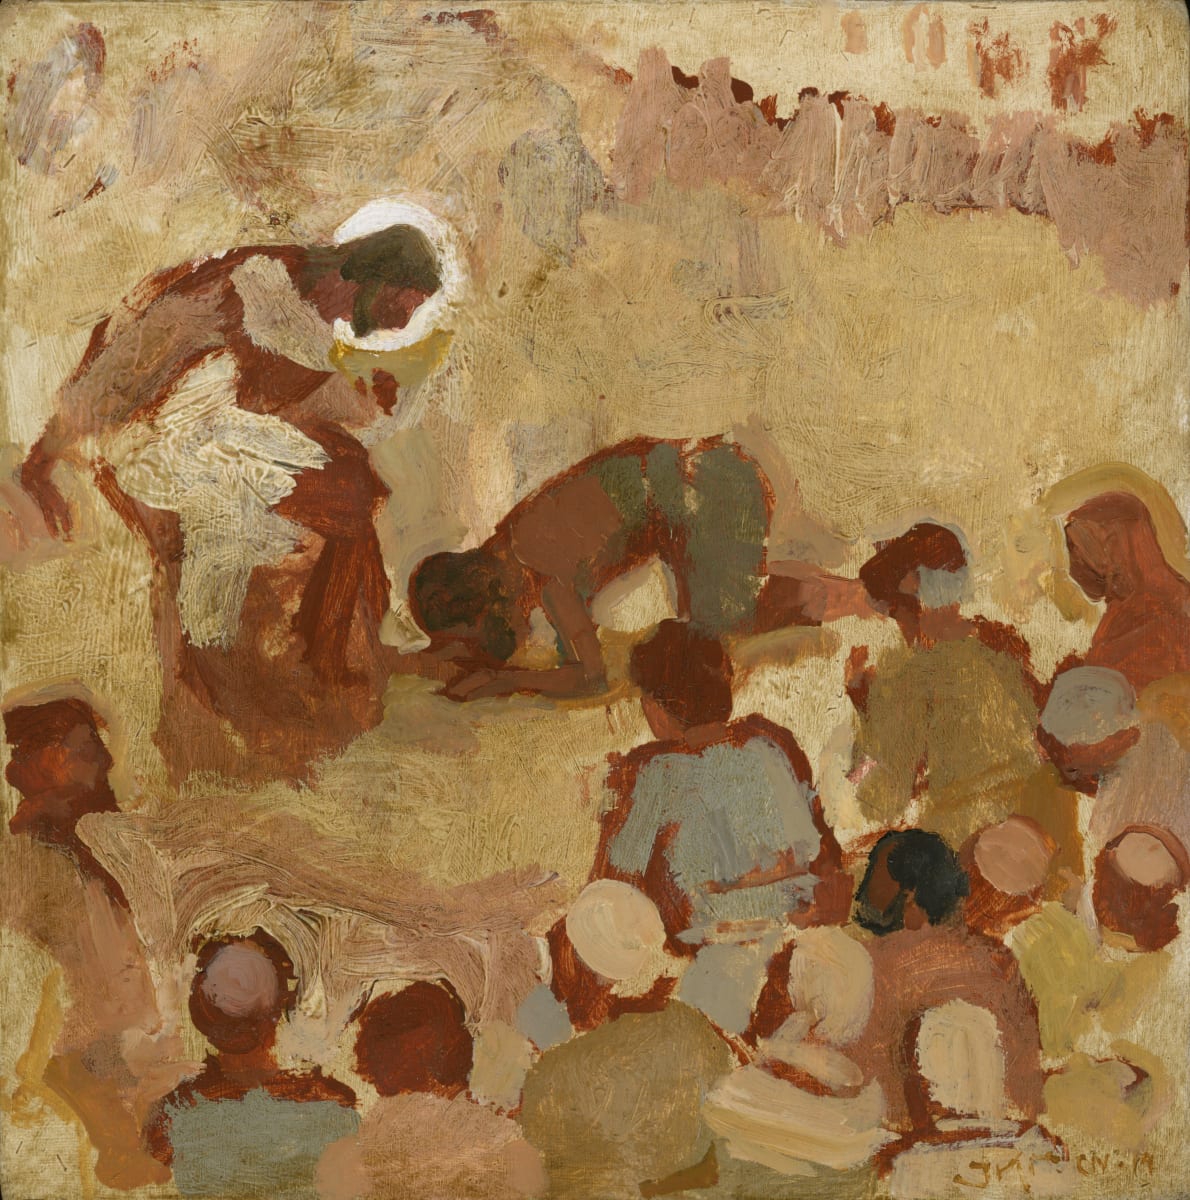 One of them Turned Back, Giving Him Thanks by J. Kirk Richards  Image: One of the healed lepers returns to kiss the Saviors feet. Luke 17:12-19